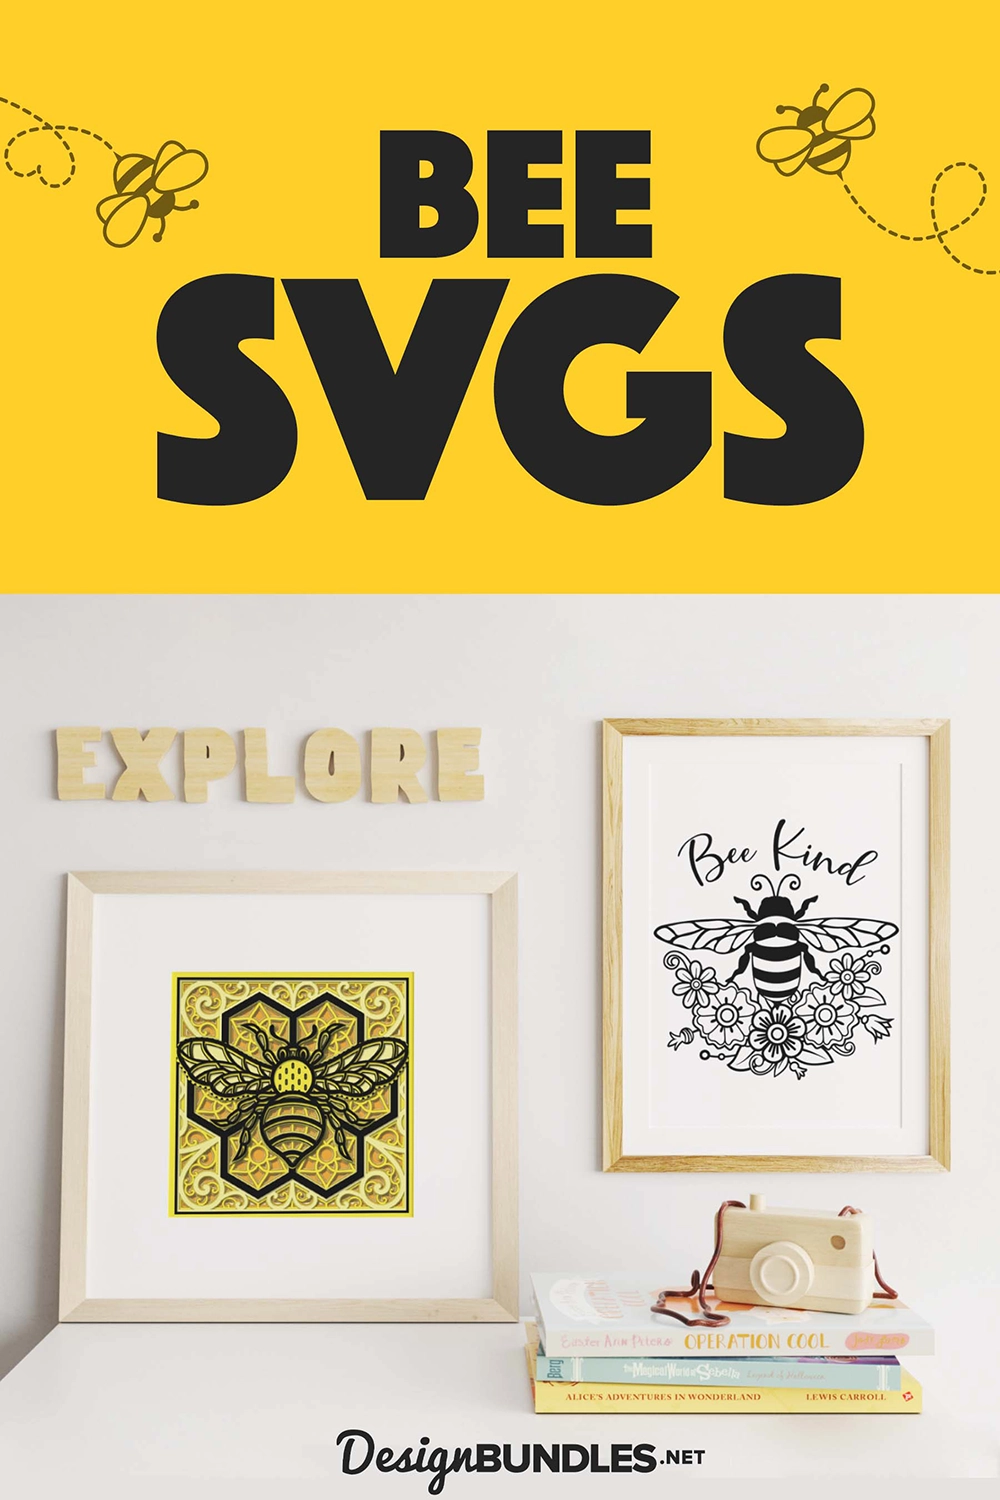 Bee SVGs